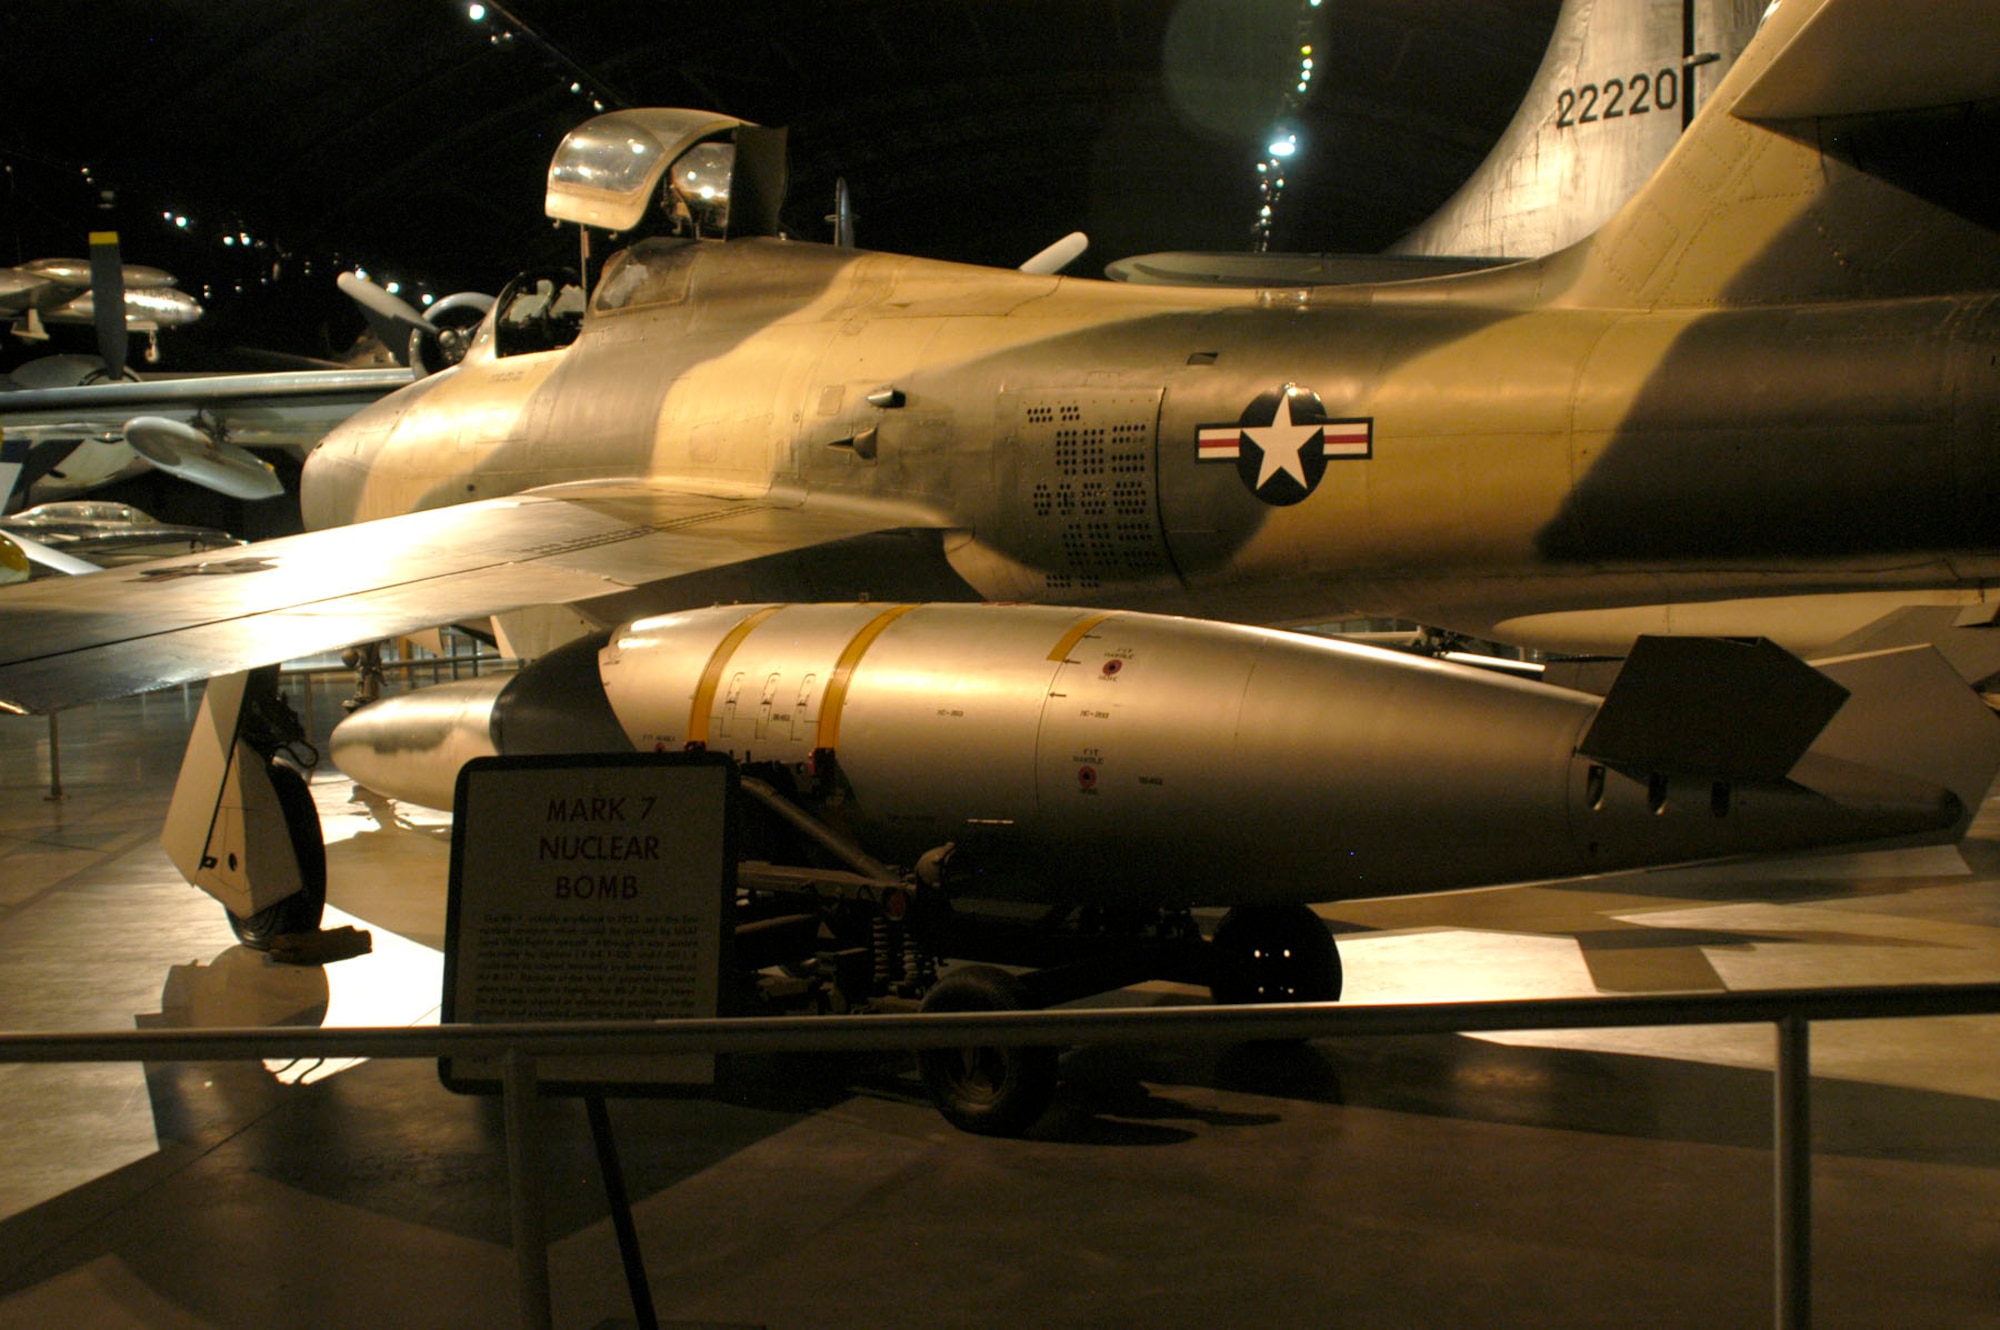 DAYTON, Ohio - The Mark 7 nuclear bomb on display in the Cold War Gallery at the National Museum of the U.S. Air Force. (U.S. Air Force photo)